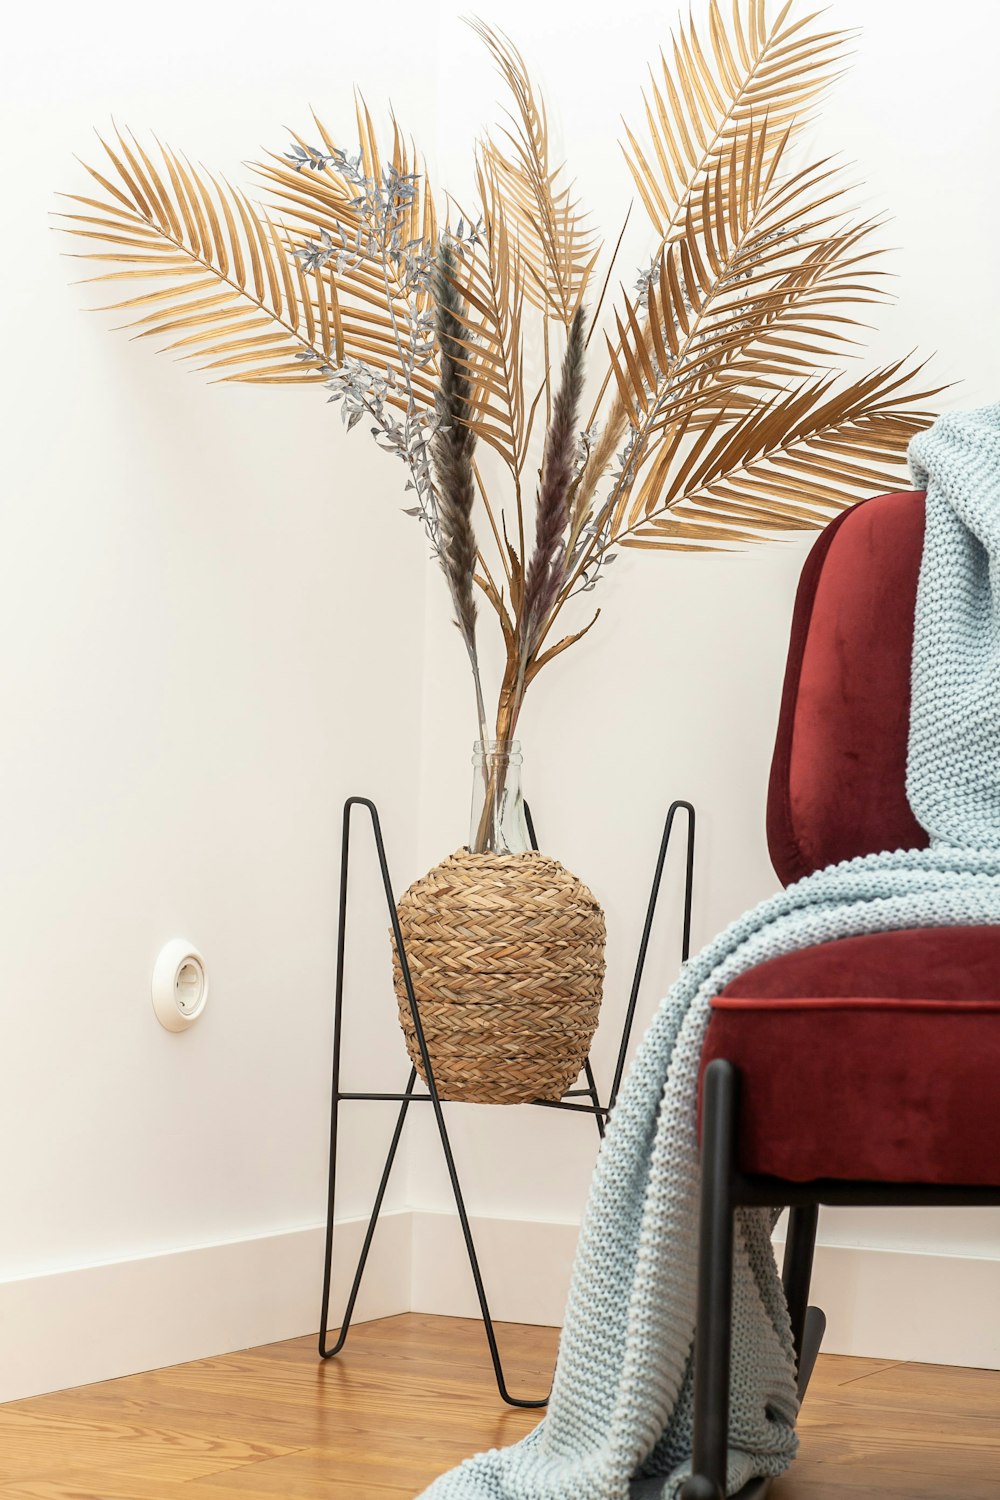 a chair with a blanket on it next to a potted plant